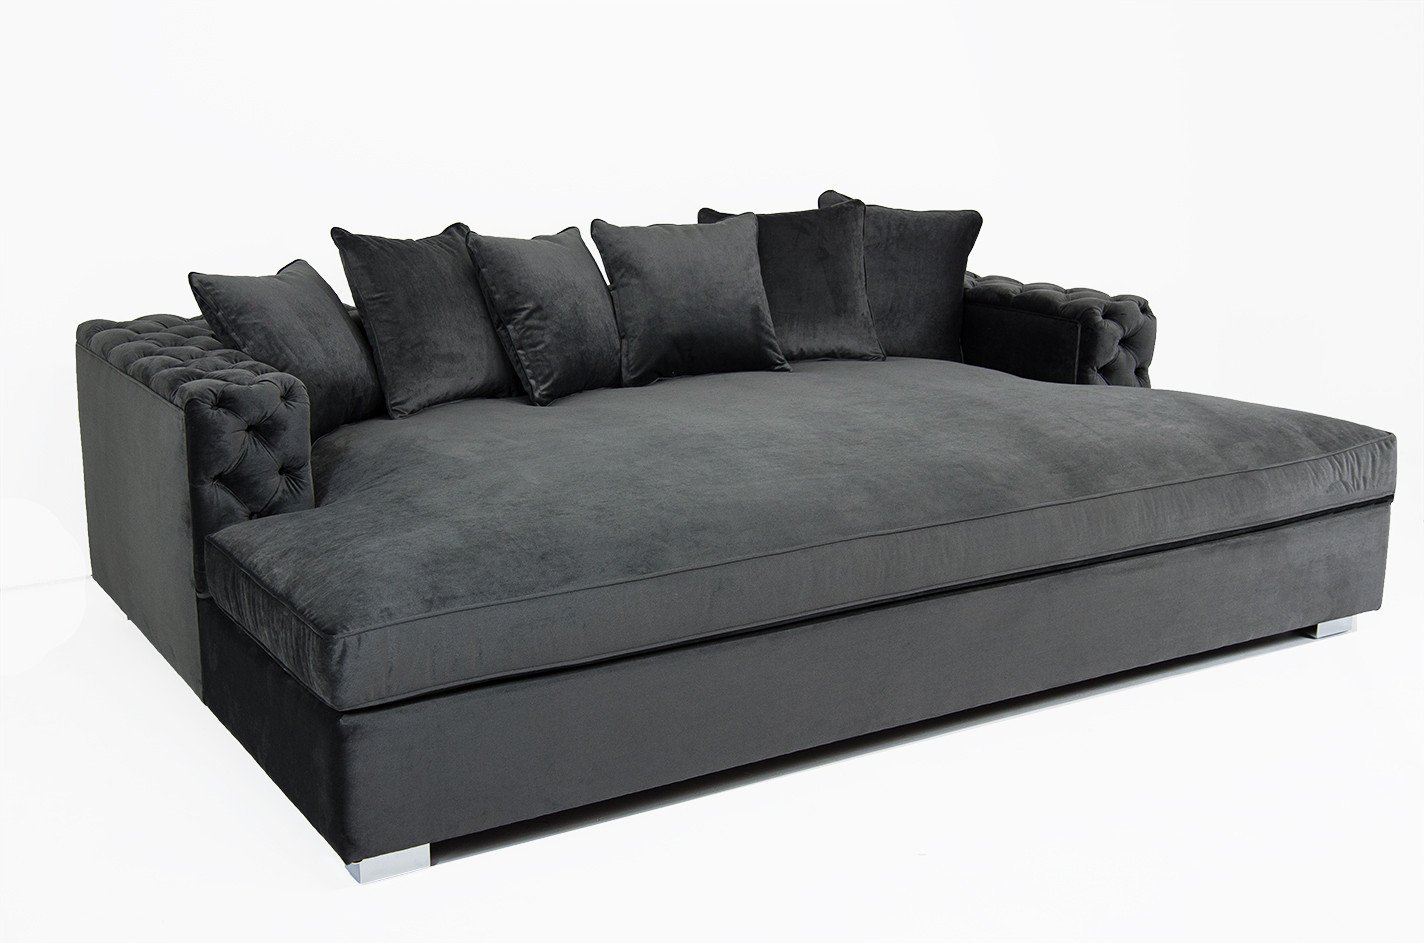 Comfortable Daybeds Living Room Unique Daybed fortable sofa Design Wayfair Daybeds Sectional fortable Day Beds Inspired Living Room